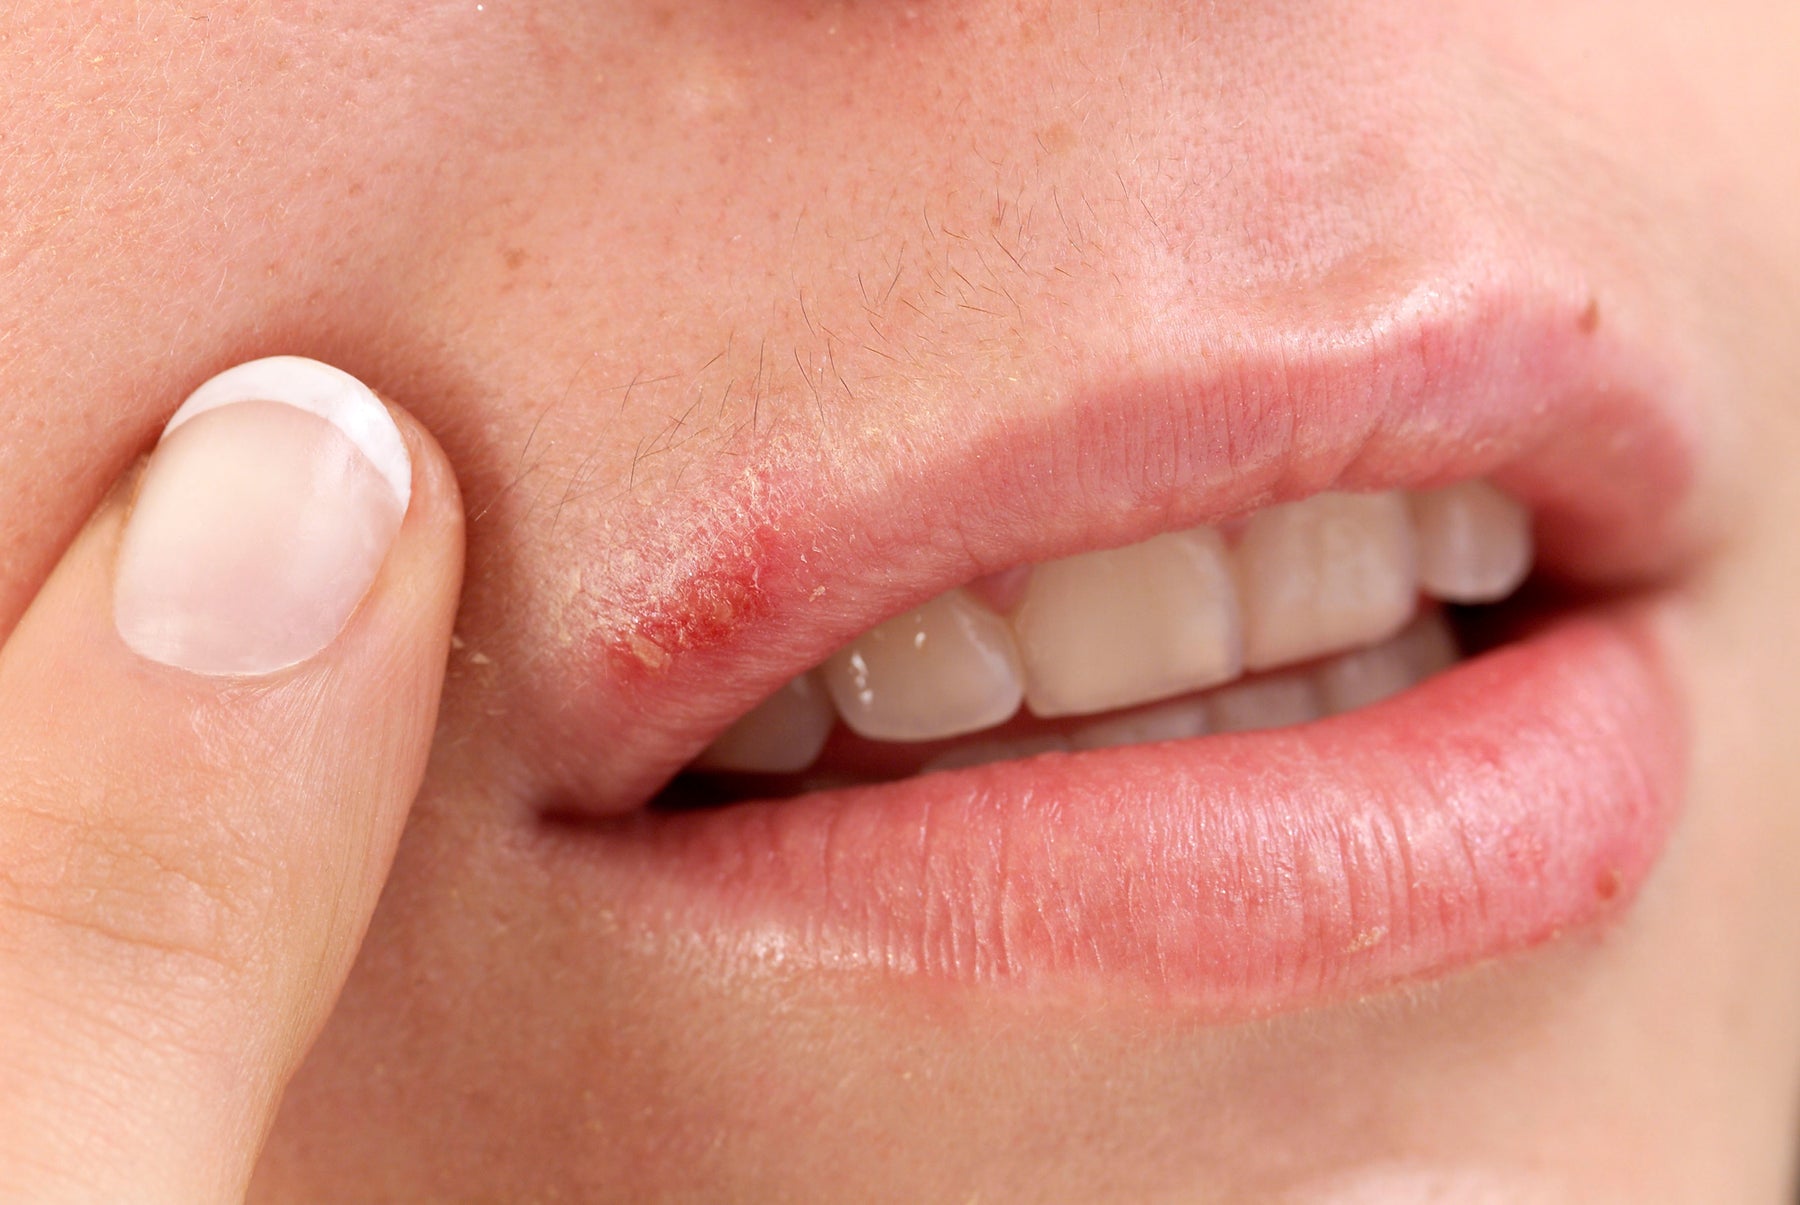 Natural Remedies for Cold Sores: The Power of Essential Oils